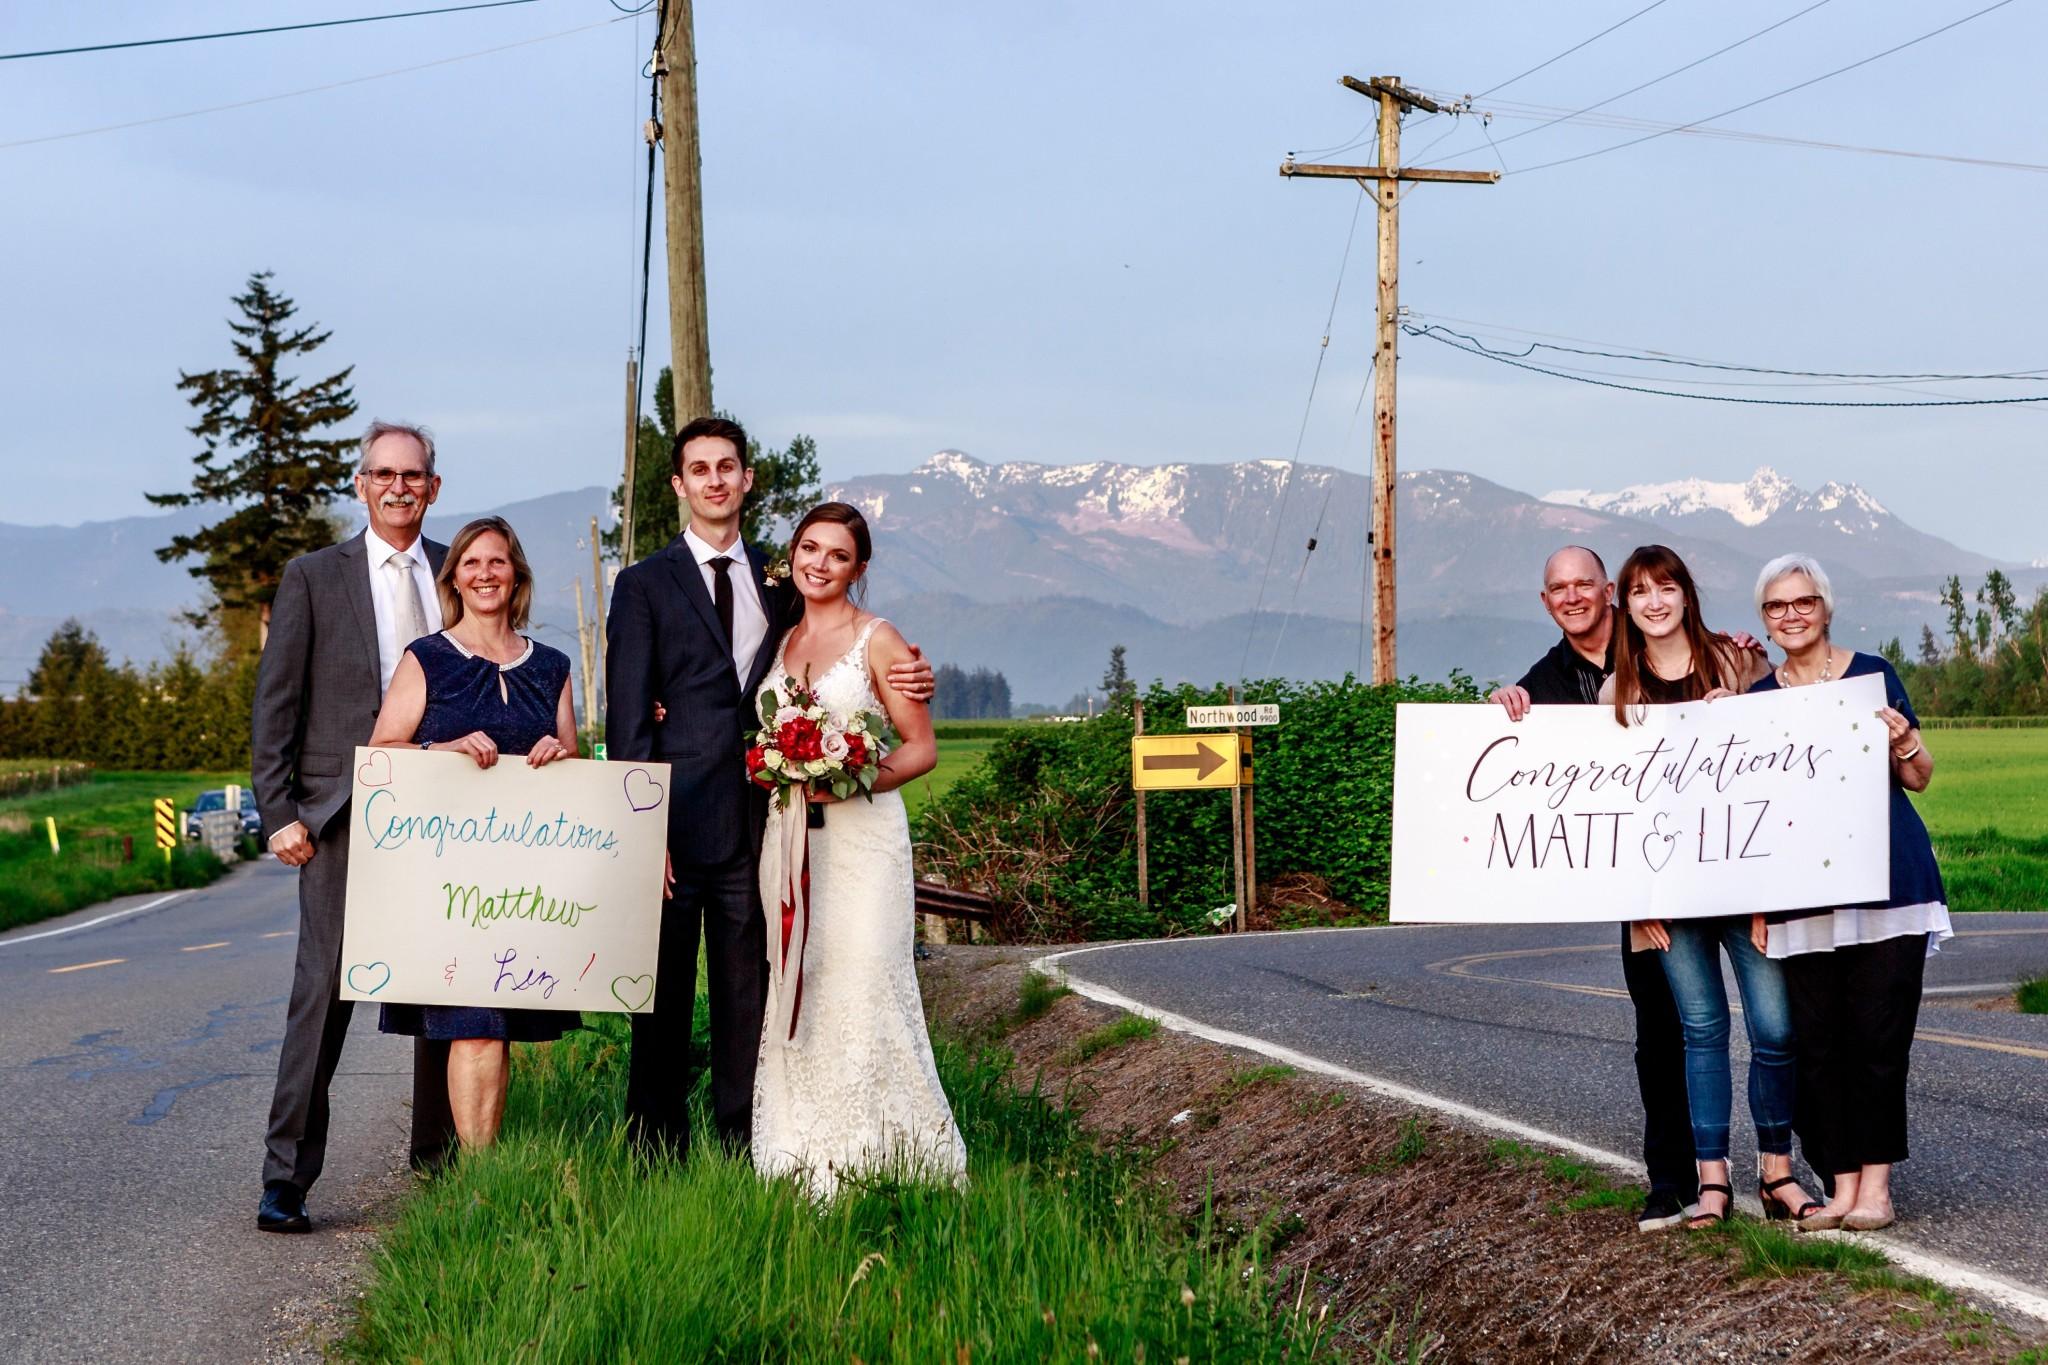 The families of Matt and Liz Peters stand at the US-Canada border to celebrate the couple's marriage